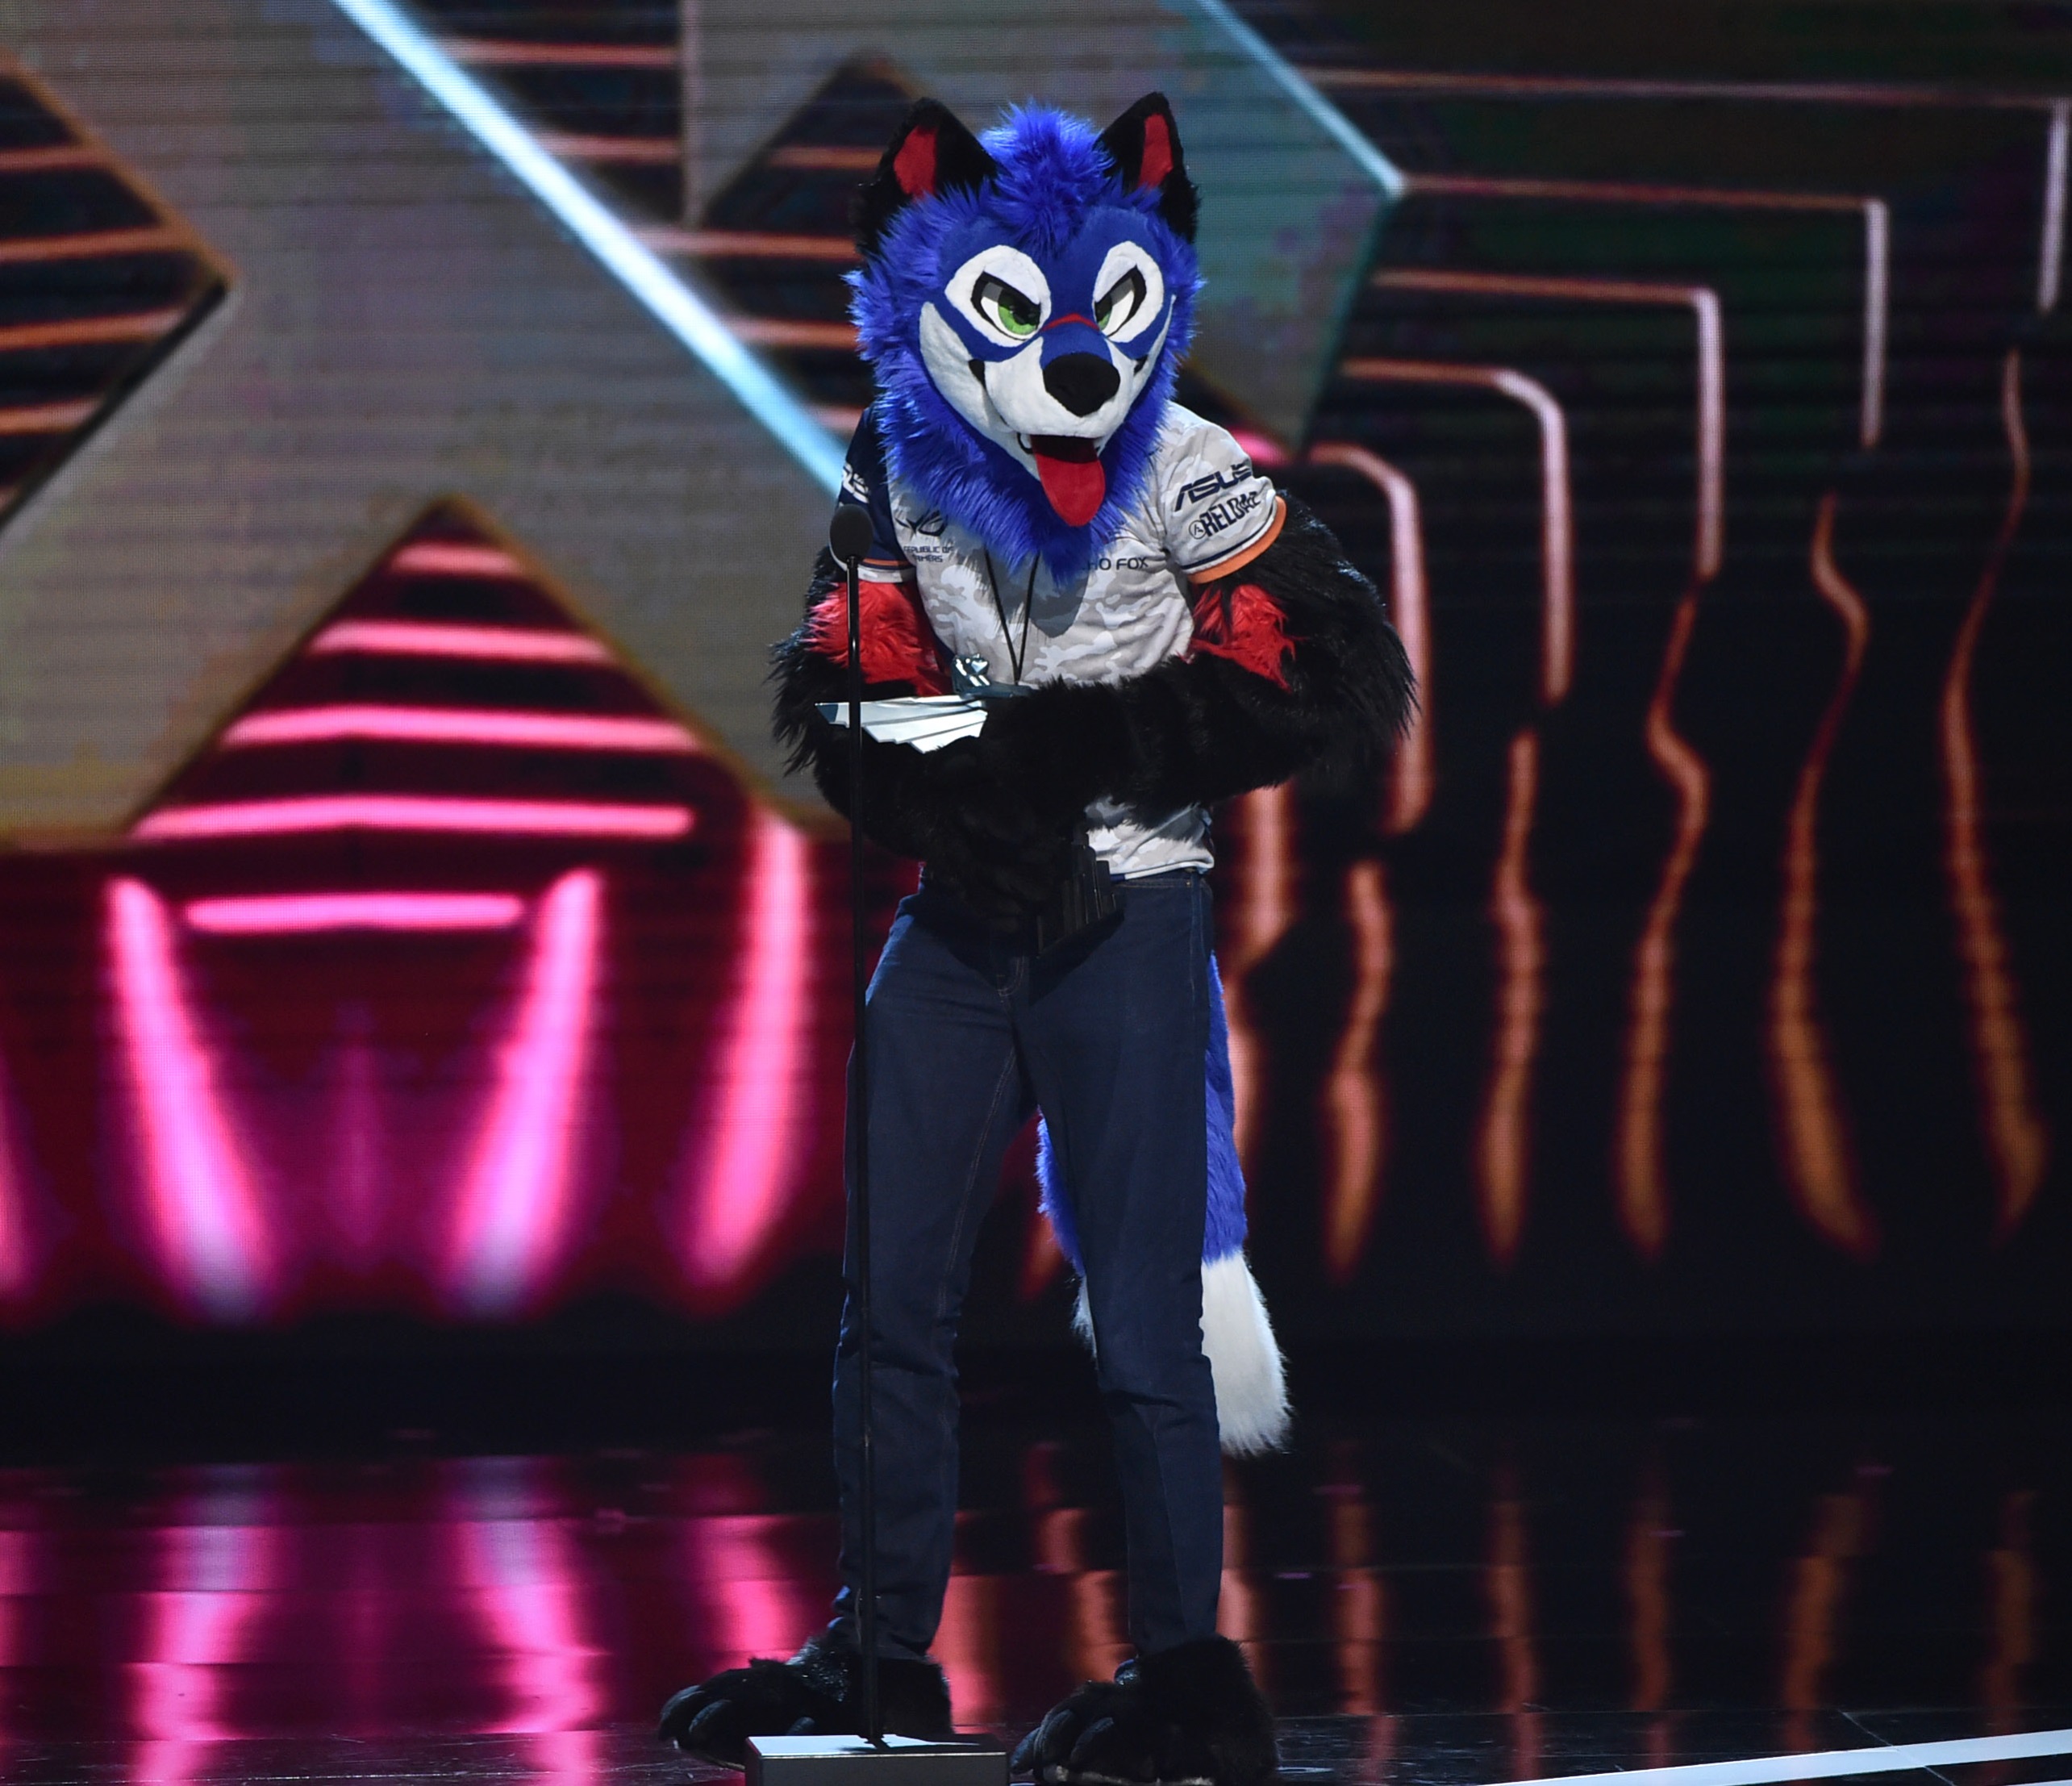 Who Is The Game Awards 2018 Best Esports Player, SonicFox? - IGN